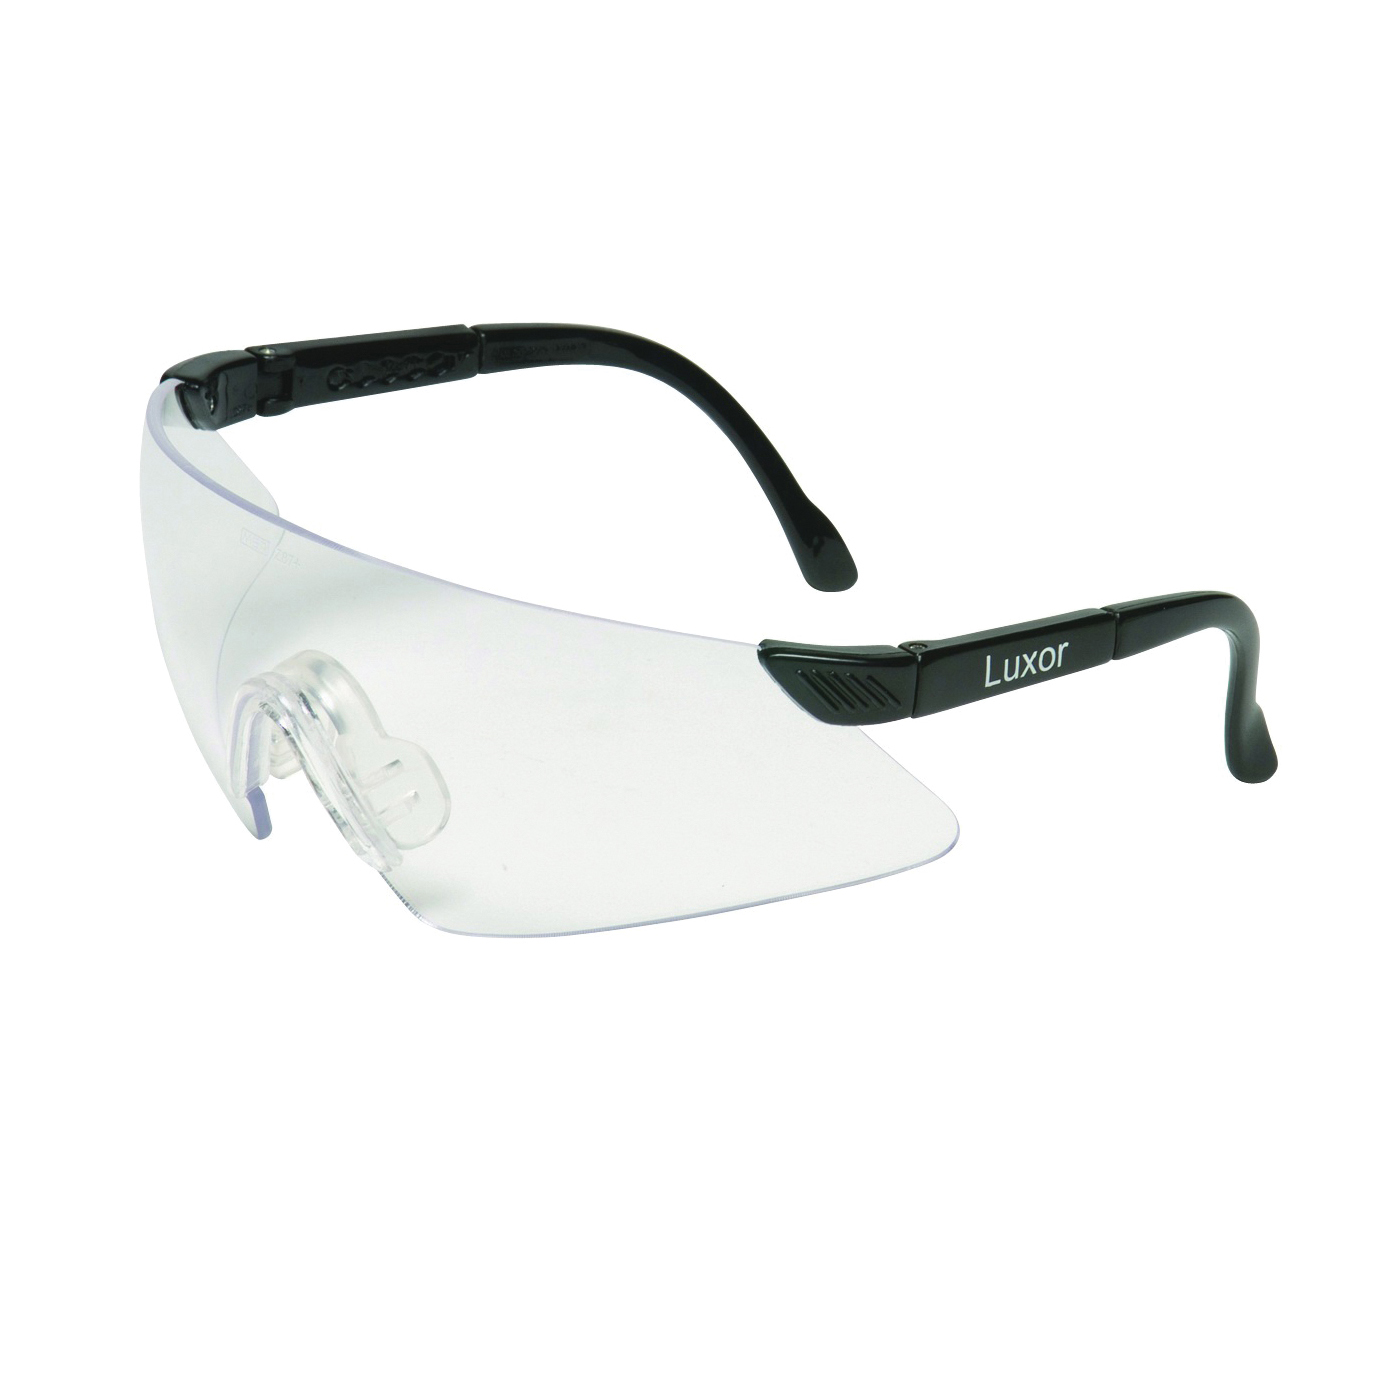 LUXOR Series 697516 Safety Glasses, Anti-Scratch Lens, Polycarbonate Lens, Frameless Frame, Polycarbonate Frame